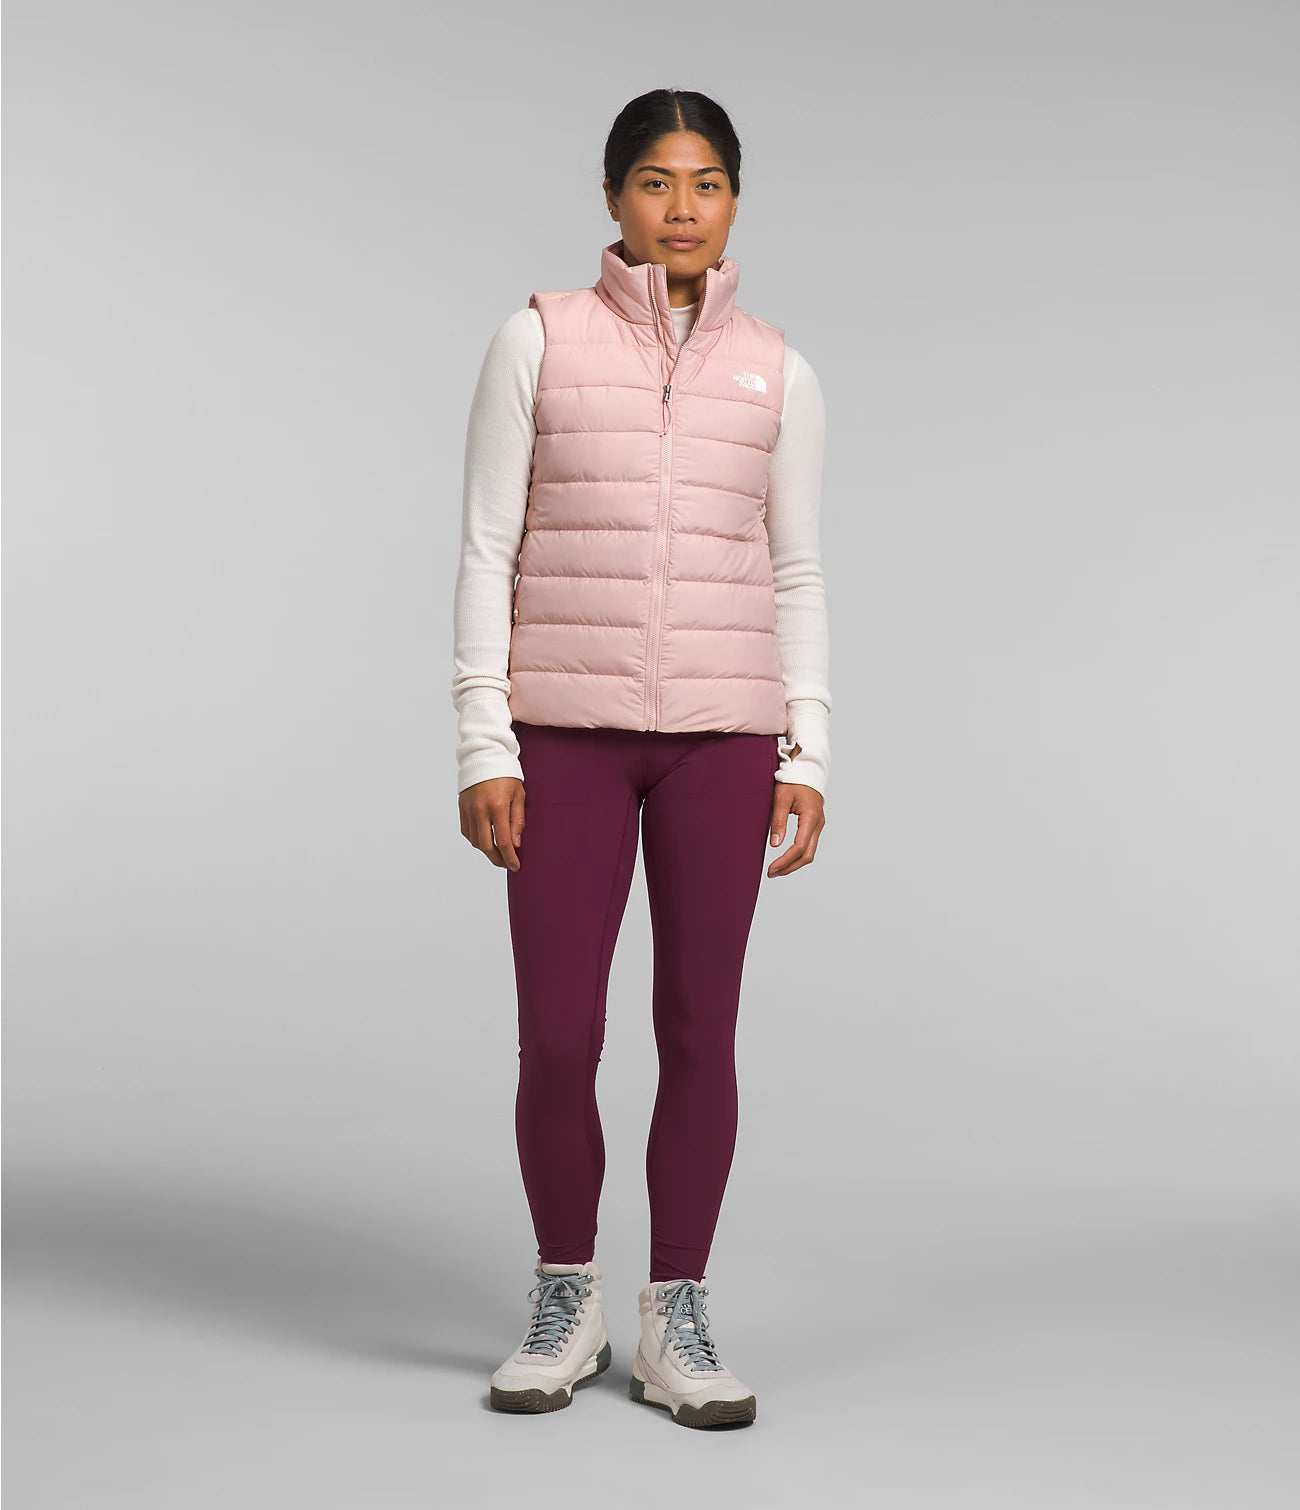 THE NORTH FACE Women's Outerwear PINK MOSS / S North Face Women’s Aconcagua 3 Vest || David's Clothing NF0A84JPLK6